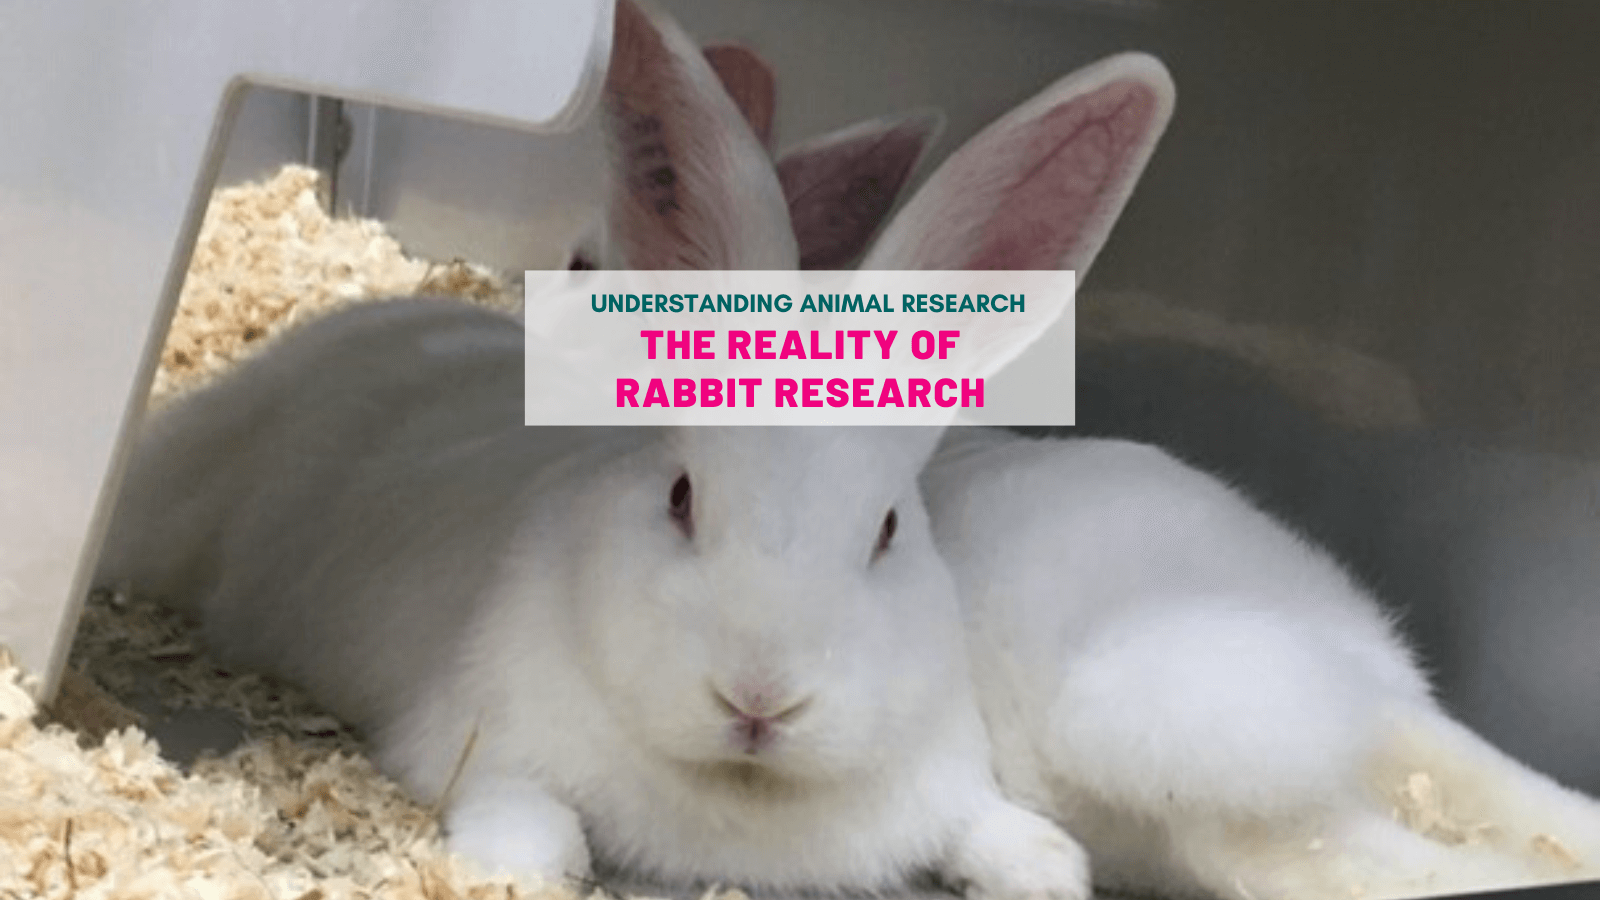 The reality of rabbit research :: Understanding Animal Research